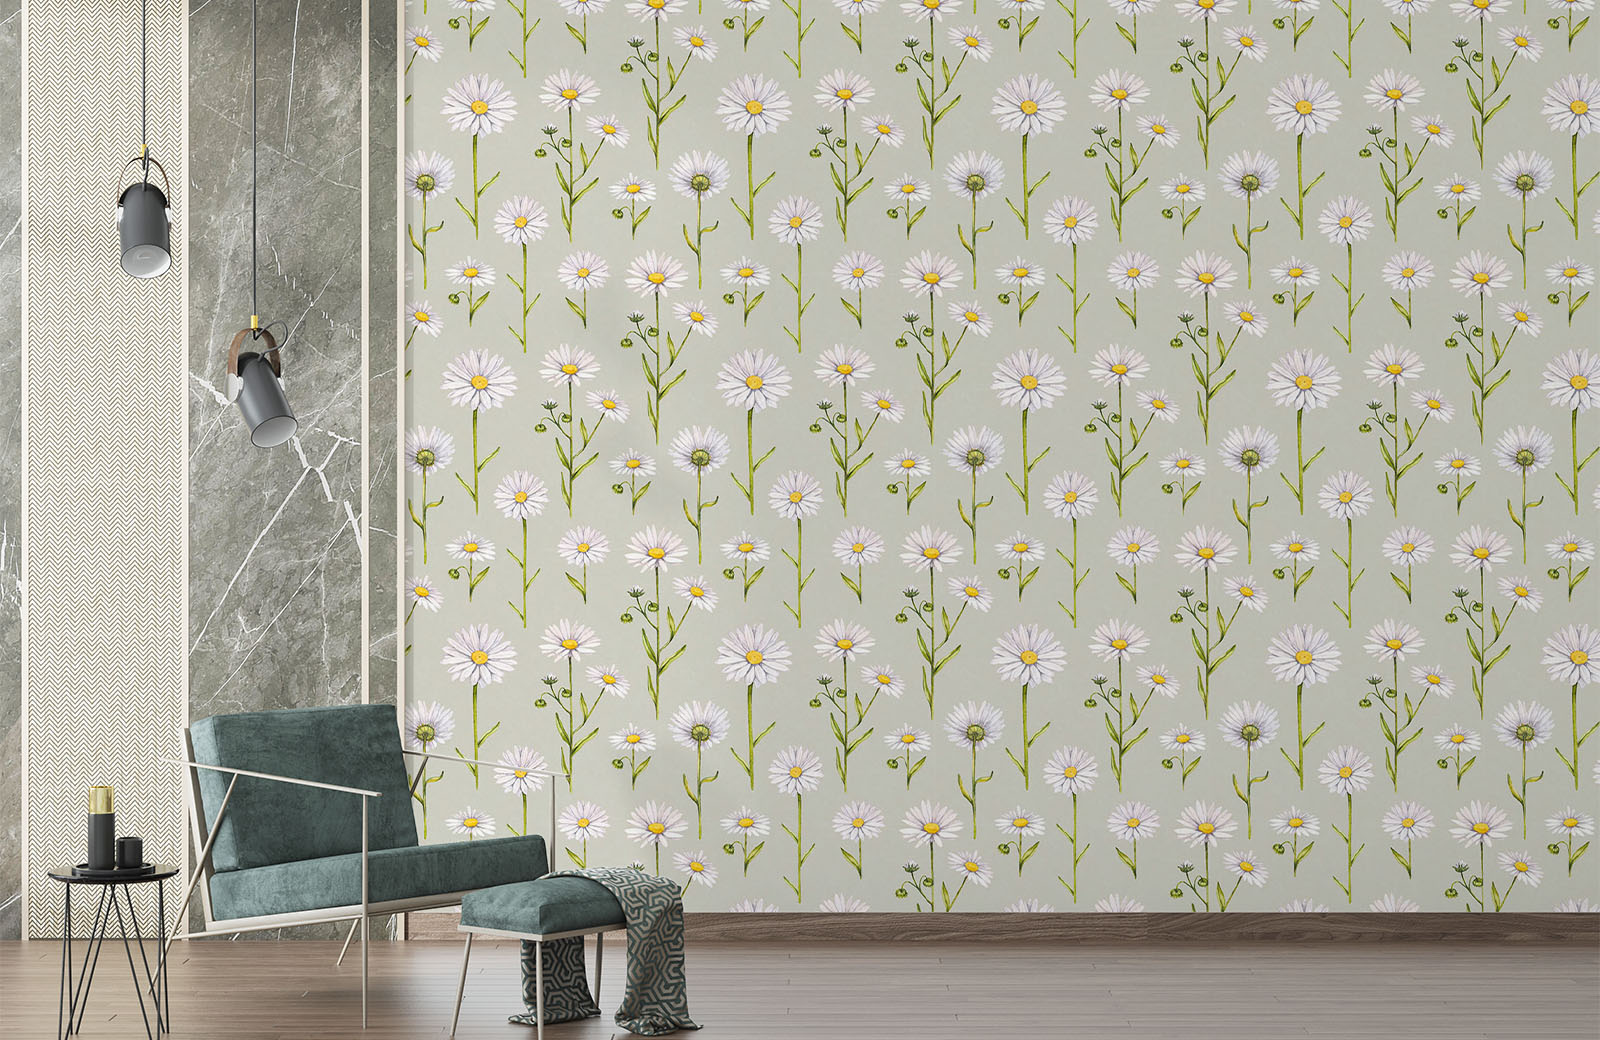 daisy-flower-with-stem-and-leaf-wallpaper-with-chair